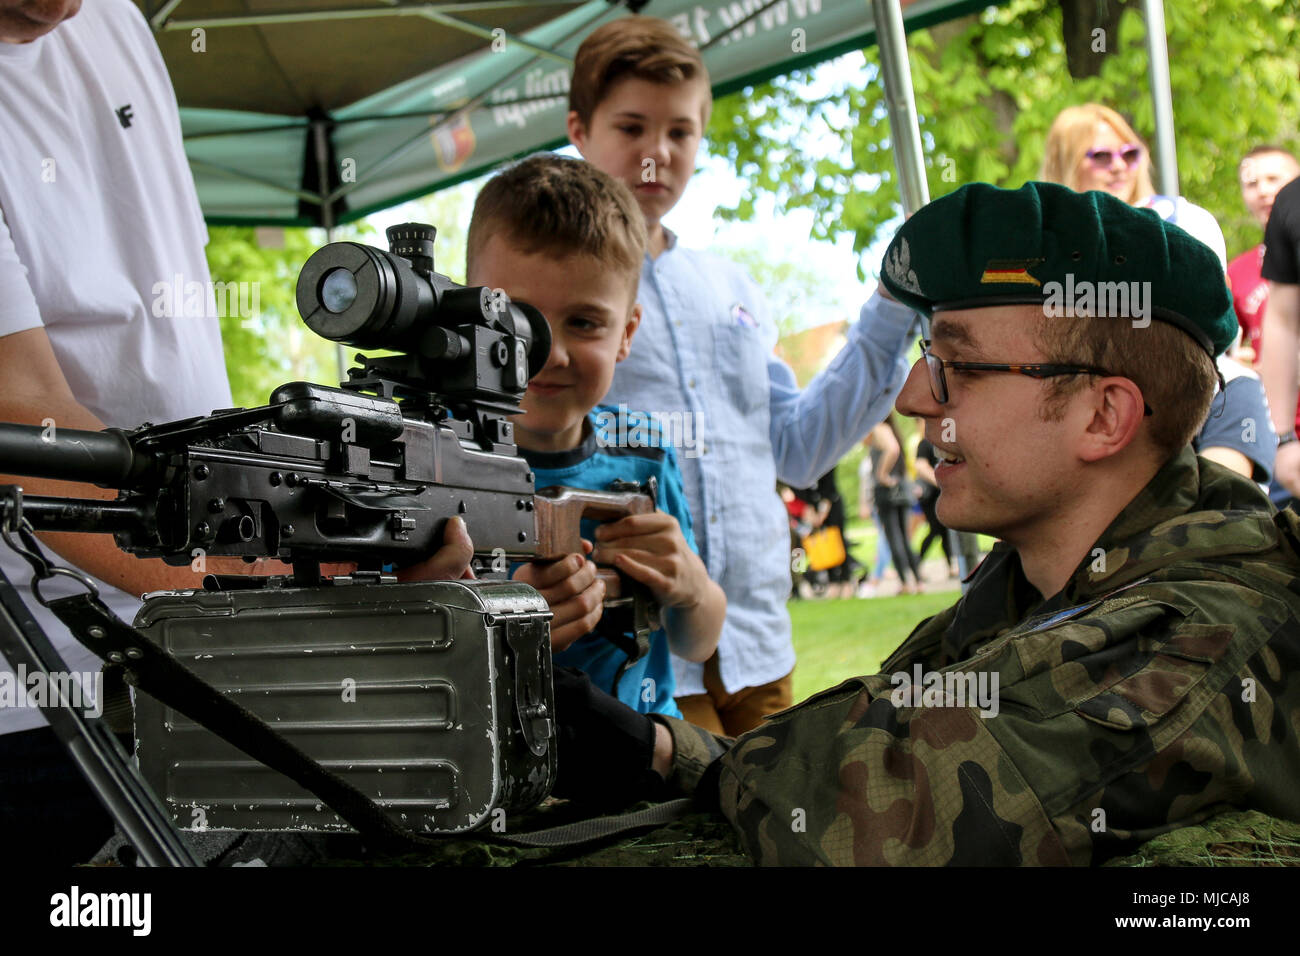 Polish Pvt. Lukas Wons, an infantryman with the 15th Mechanized Brigade, shows a Polish child a UKM-2000 machine gun during a bridge opening ceremony in Giżycko, Poland, May 1, 2018. The ceremony was held between the town of Giżycko and the Soldiers of Battle Group Poland: a unique, multinational coalition of U.S., U.K., Croatian and Romanian soldiers who serve with the Polish 15th Mechanized Brigade as a deterrence force in support of NATO’s Enhanced Forward Presence. (U.S. Army photo by Spc. Hubert D. Delany III /22nd Mobile Public Affairs Detachment) Stock Photo